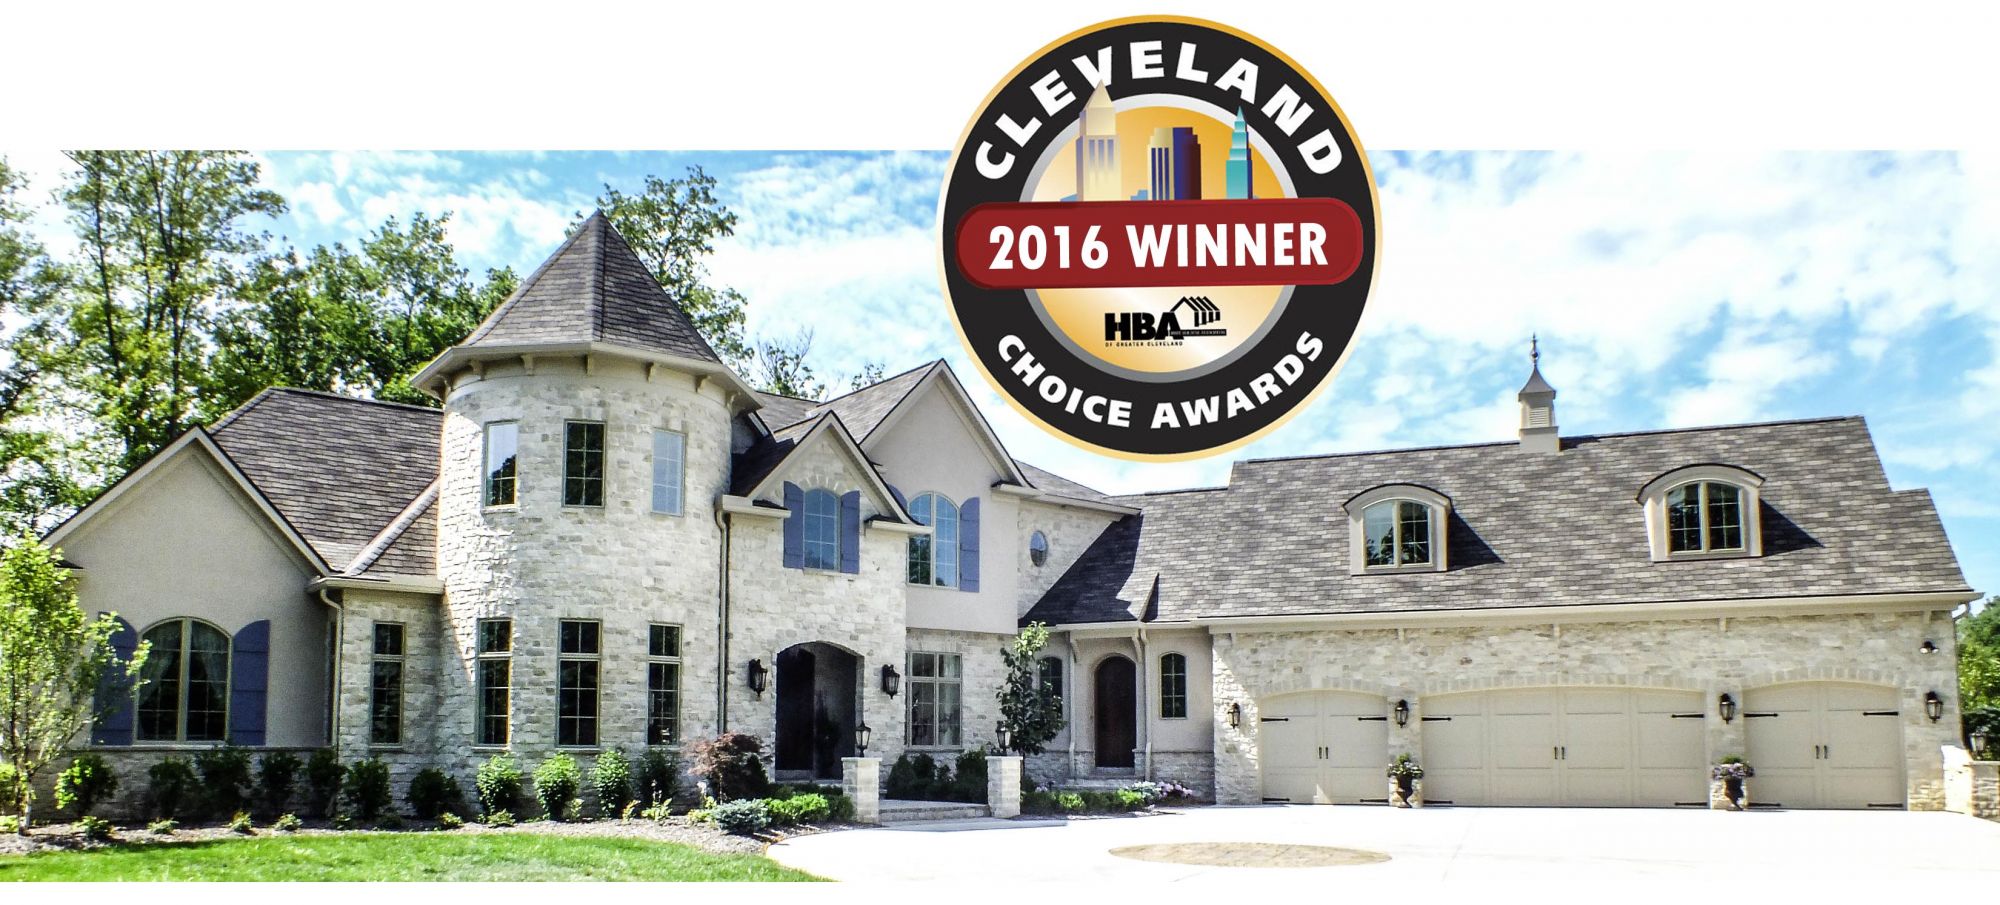 Best Exterior Architectural Design - Over 4000 sf - Small Volume Builder 